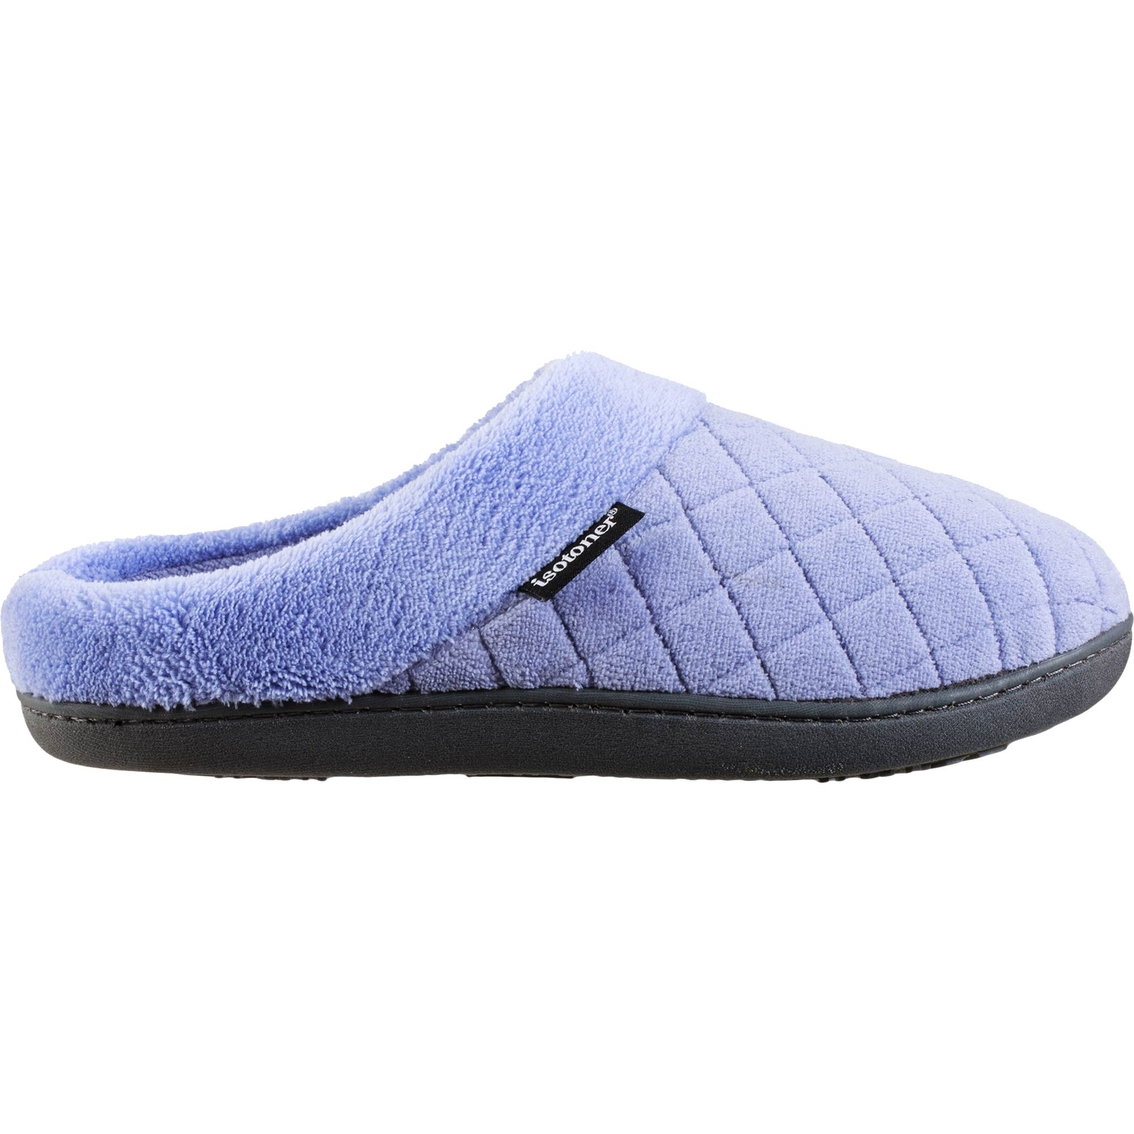 Isotoner Totes Women's Memory Foam Microterry Milly Hoodback Slippers ...